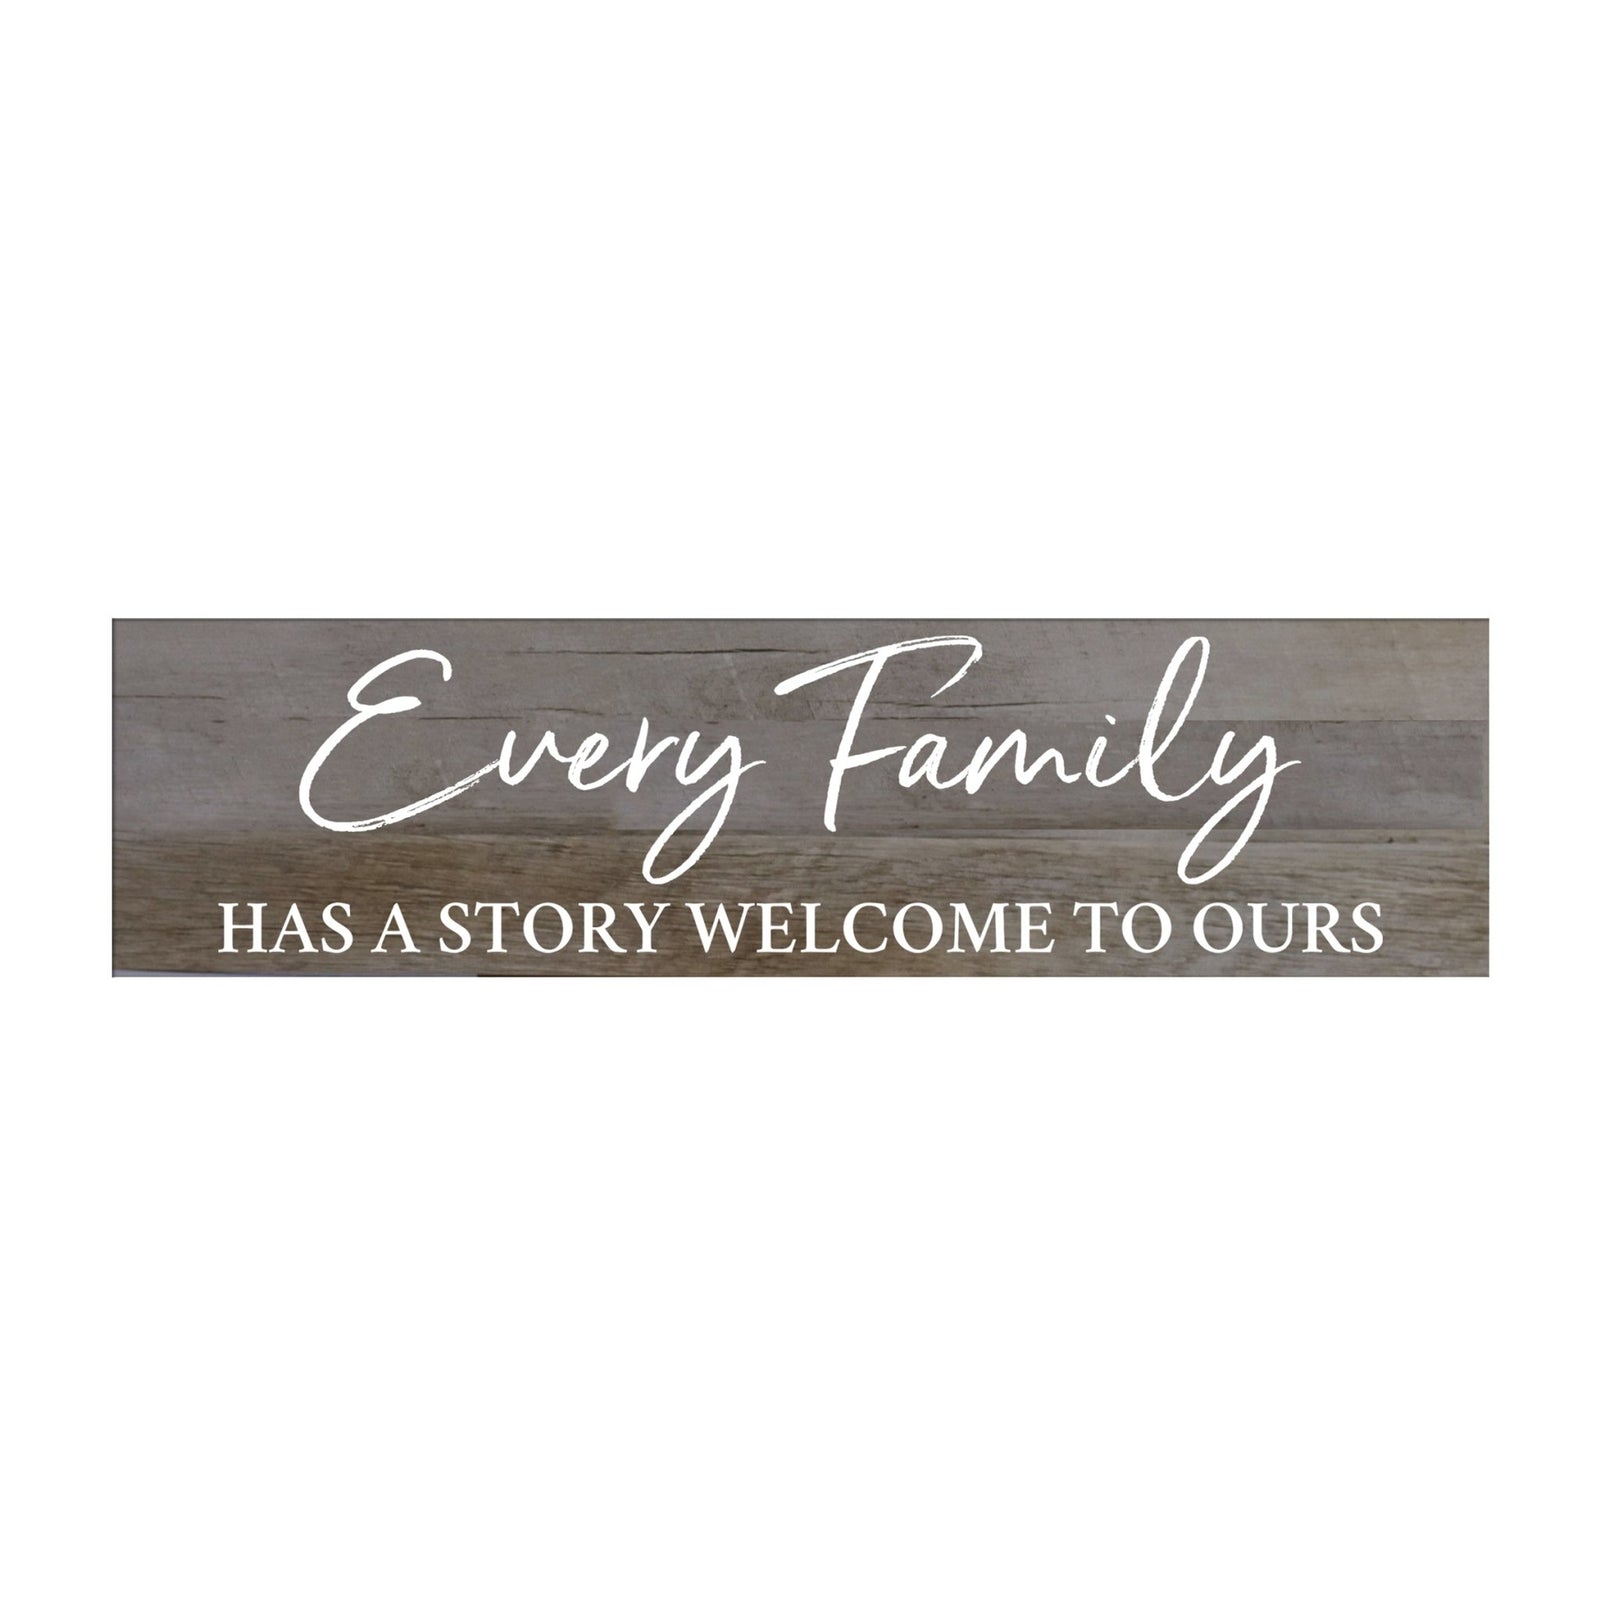 Inspirational Everyday Home and Family Wooden Wall Art Hanging Plaque 10 x 40 – Every Family Has A - LifeSong Milestones